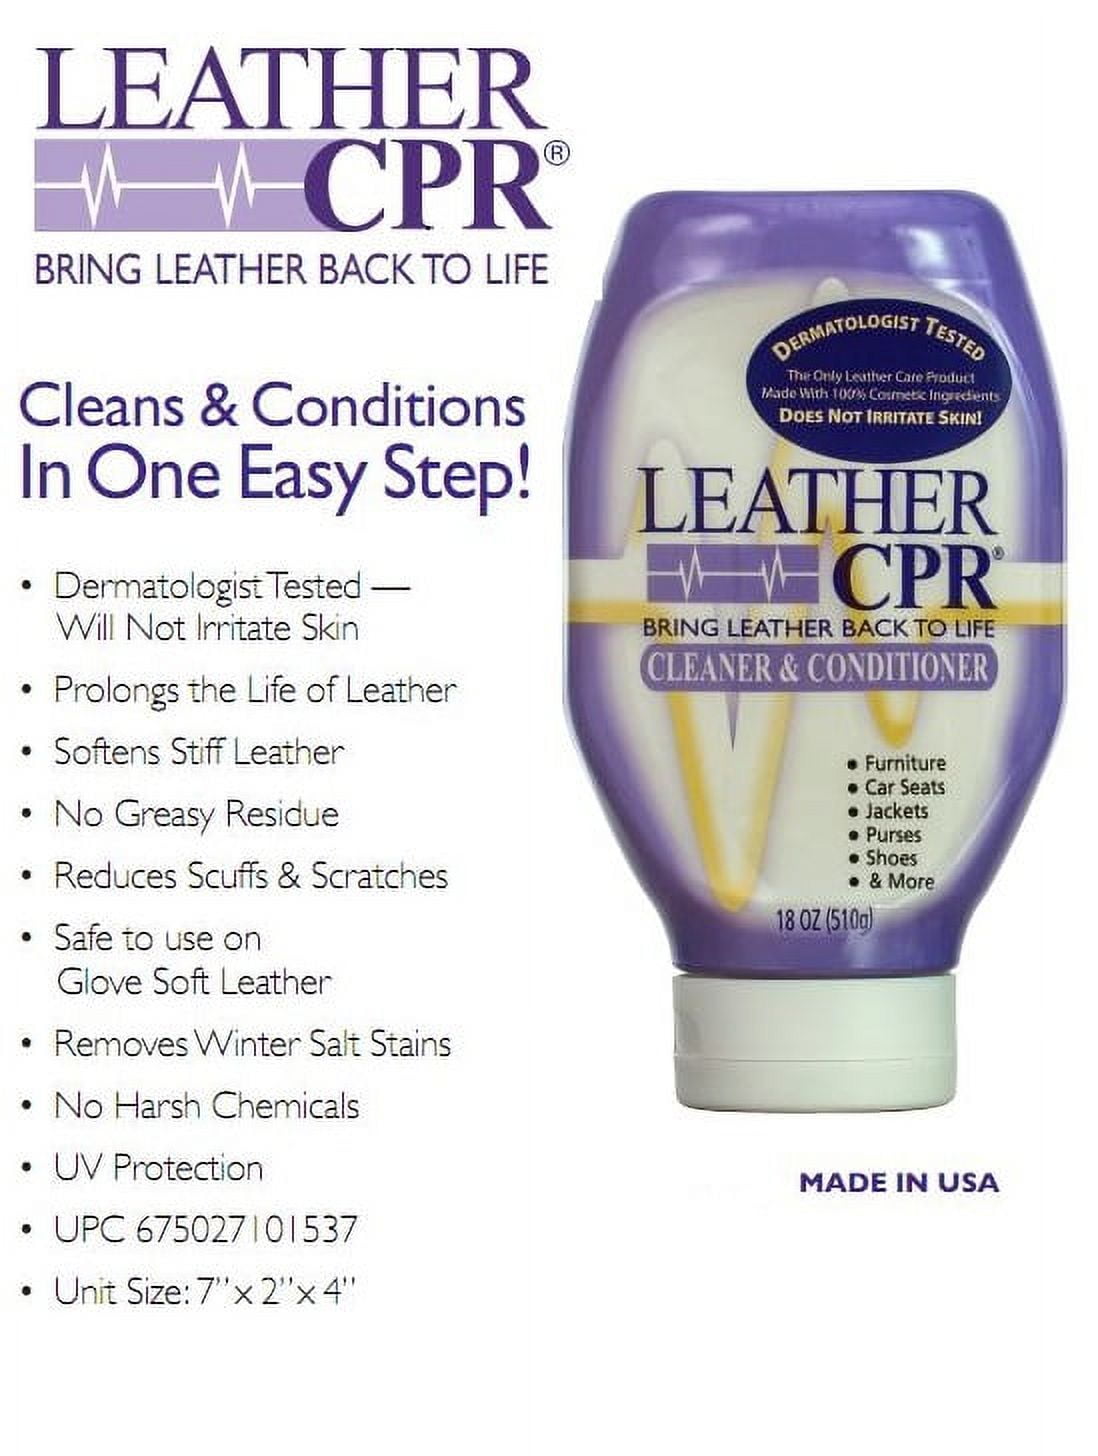 Leather CPR Cleaner & Conditioner (Complete Demo & Review